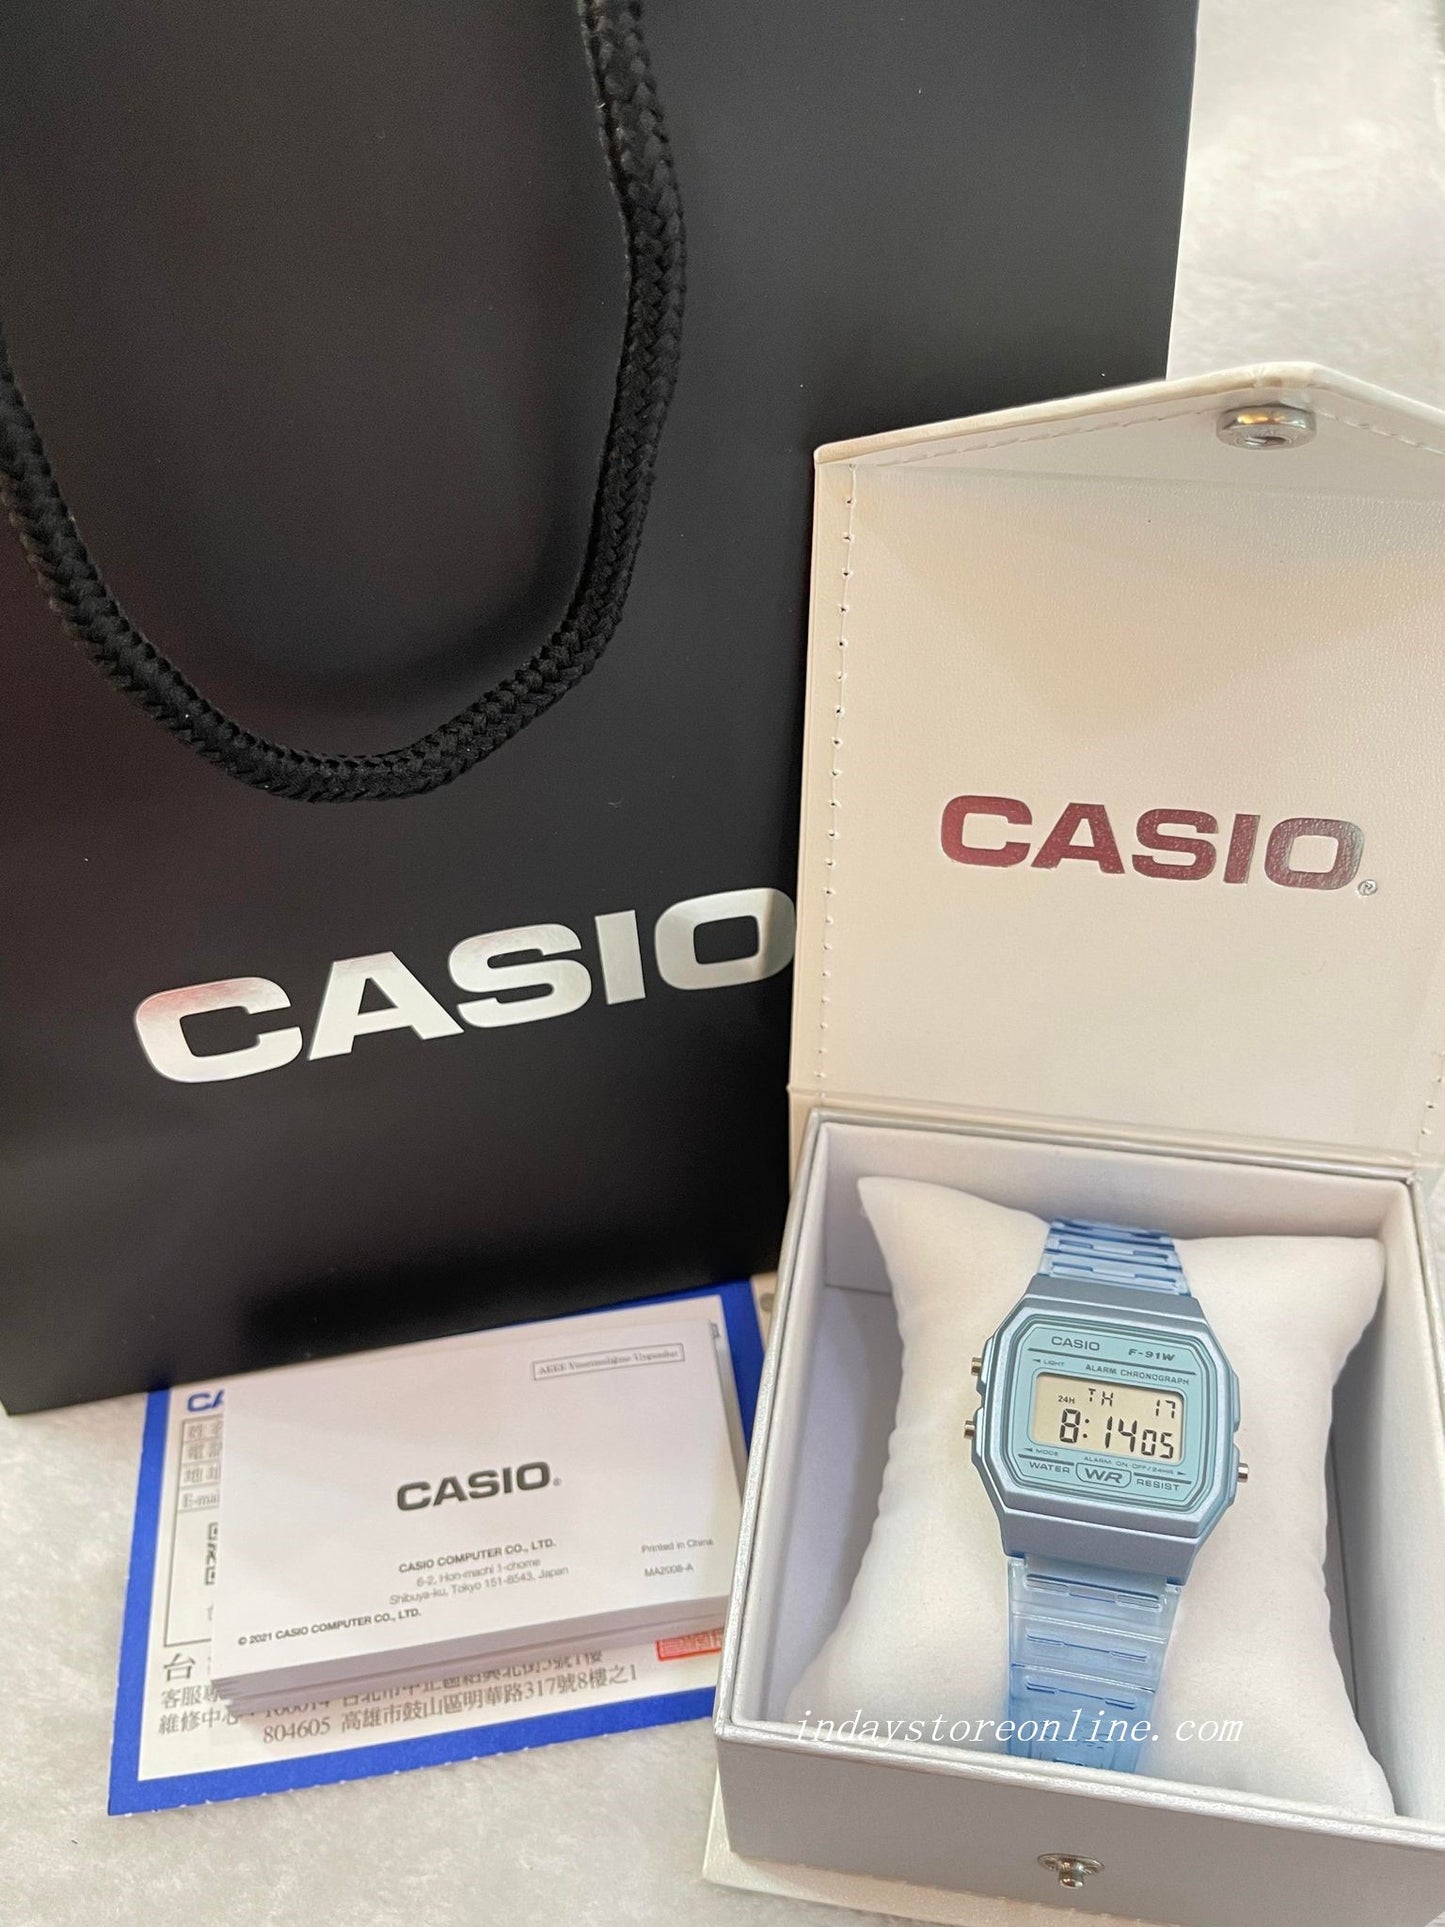 Casio Digital Women's Watch F-91WS-2 Digital Casual Design Resin Band Resin Glass Battery Life: 7 years